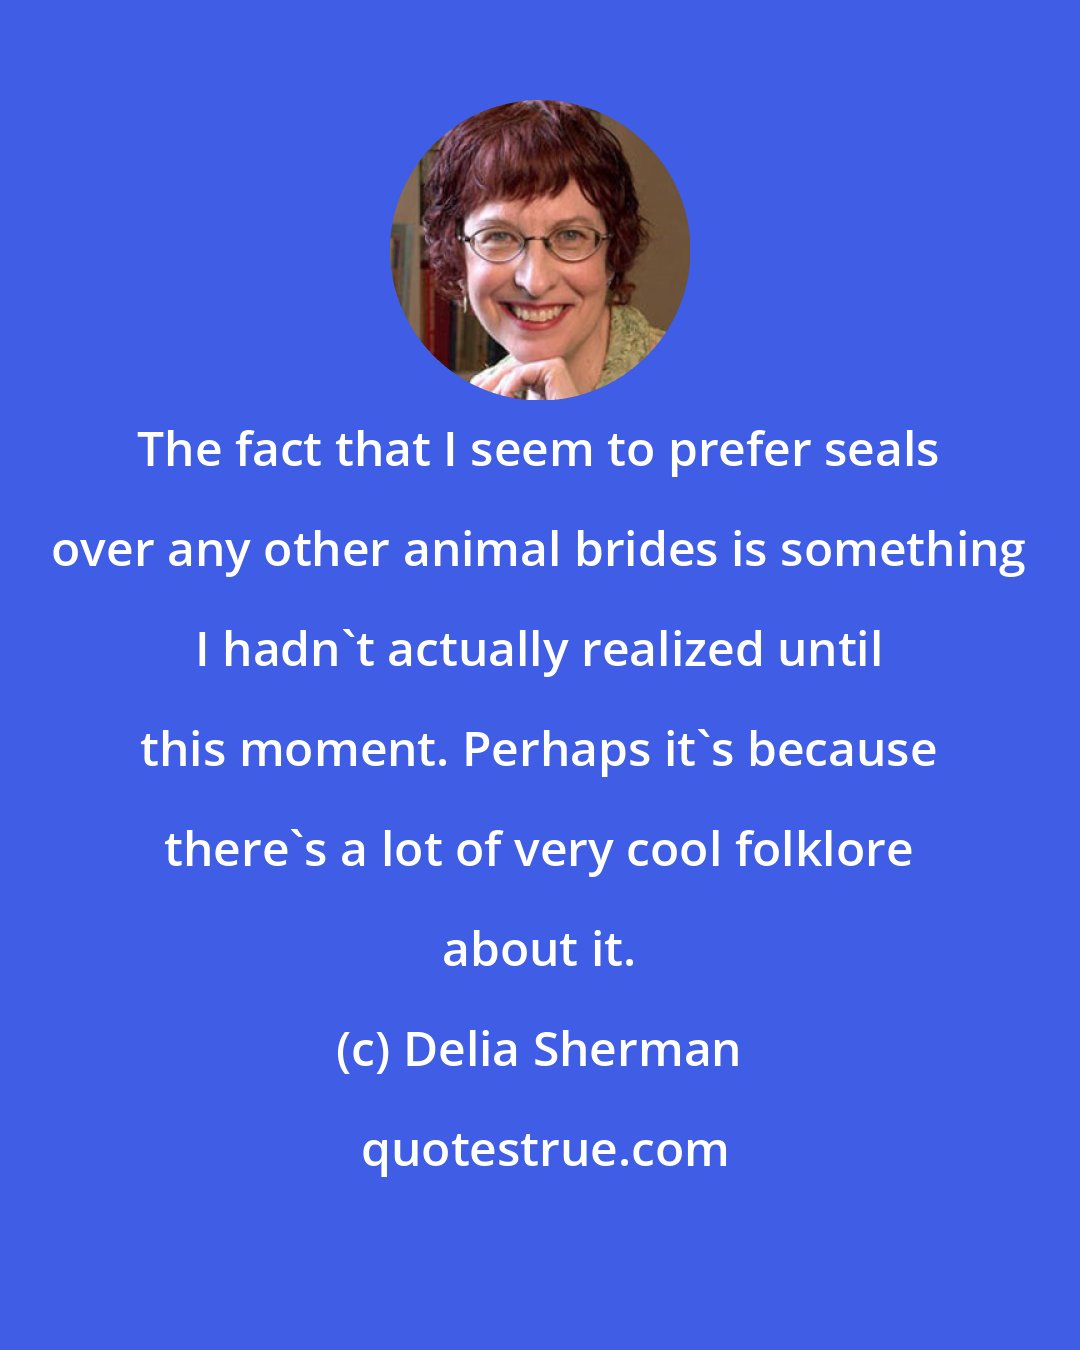 Delia Sherman: The fact that I seem to prefer seals over any other animal brides is something I hadn't actually realized until this moment. Perhaps it's because there's a lot of very cool folklore about it.